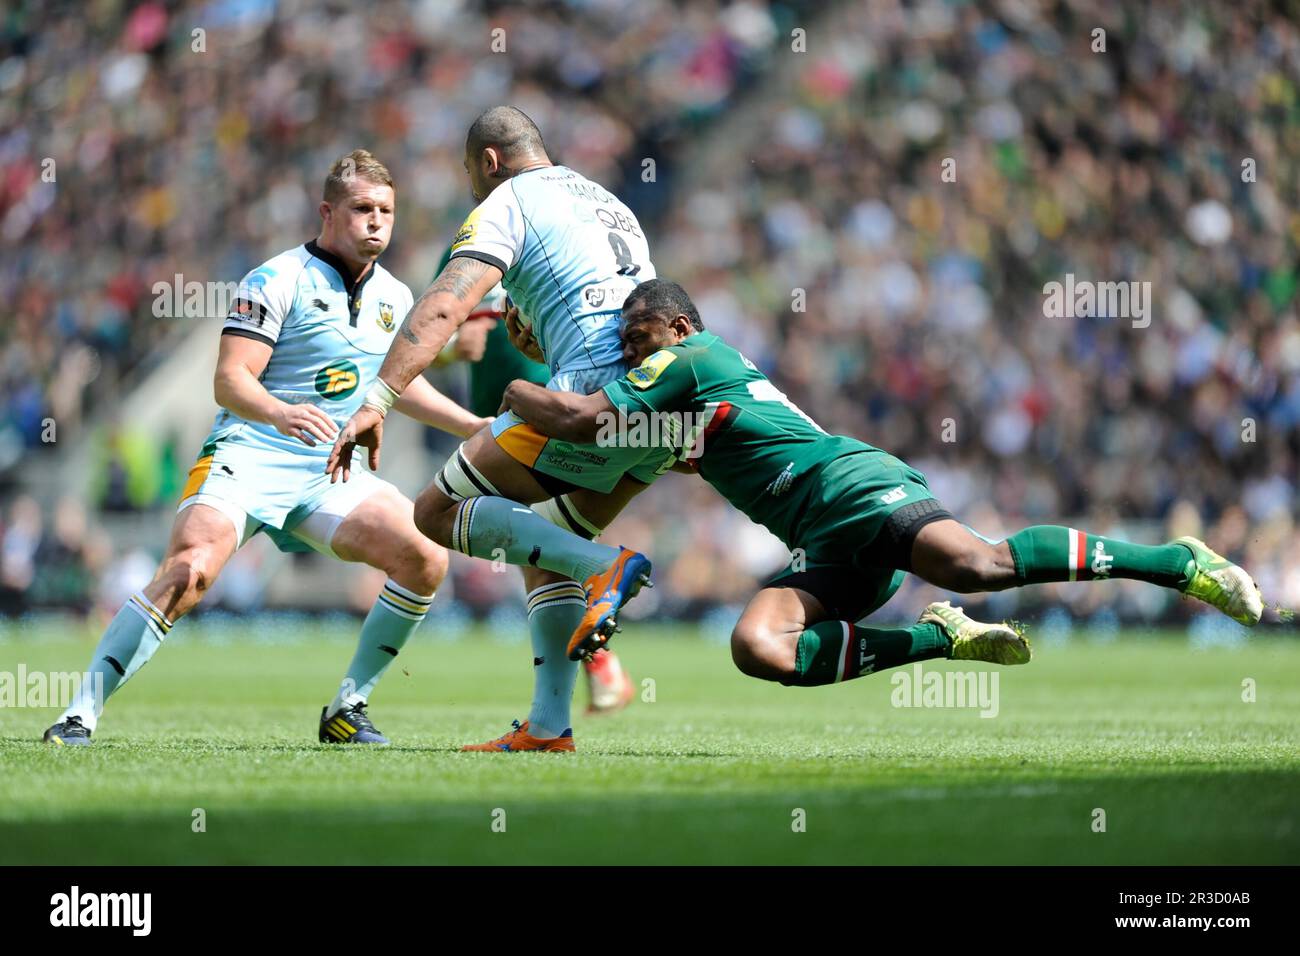 Samu Manoa of Northampton Saints is tackled by Vereniki Goneva of Leicester Tigers as Dylan Hartley of Northampton Saints looks on during the Aviva Pr Stock Photo